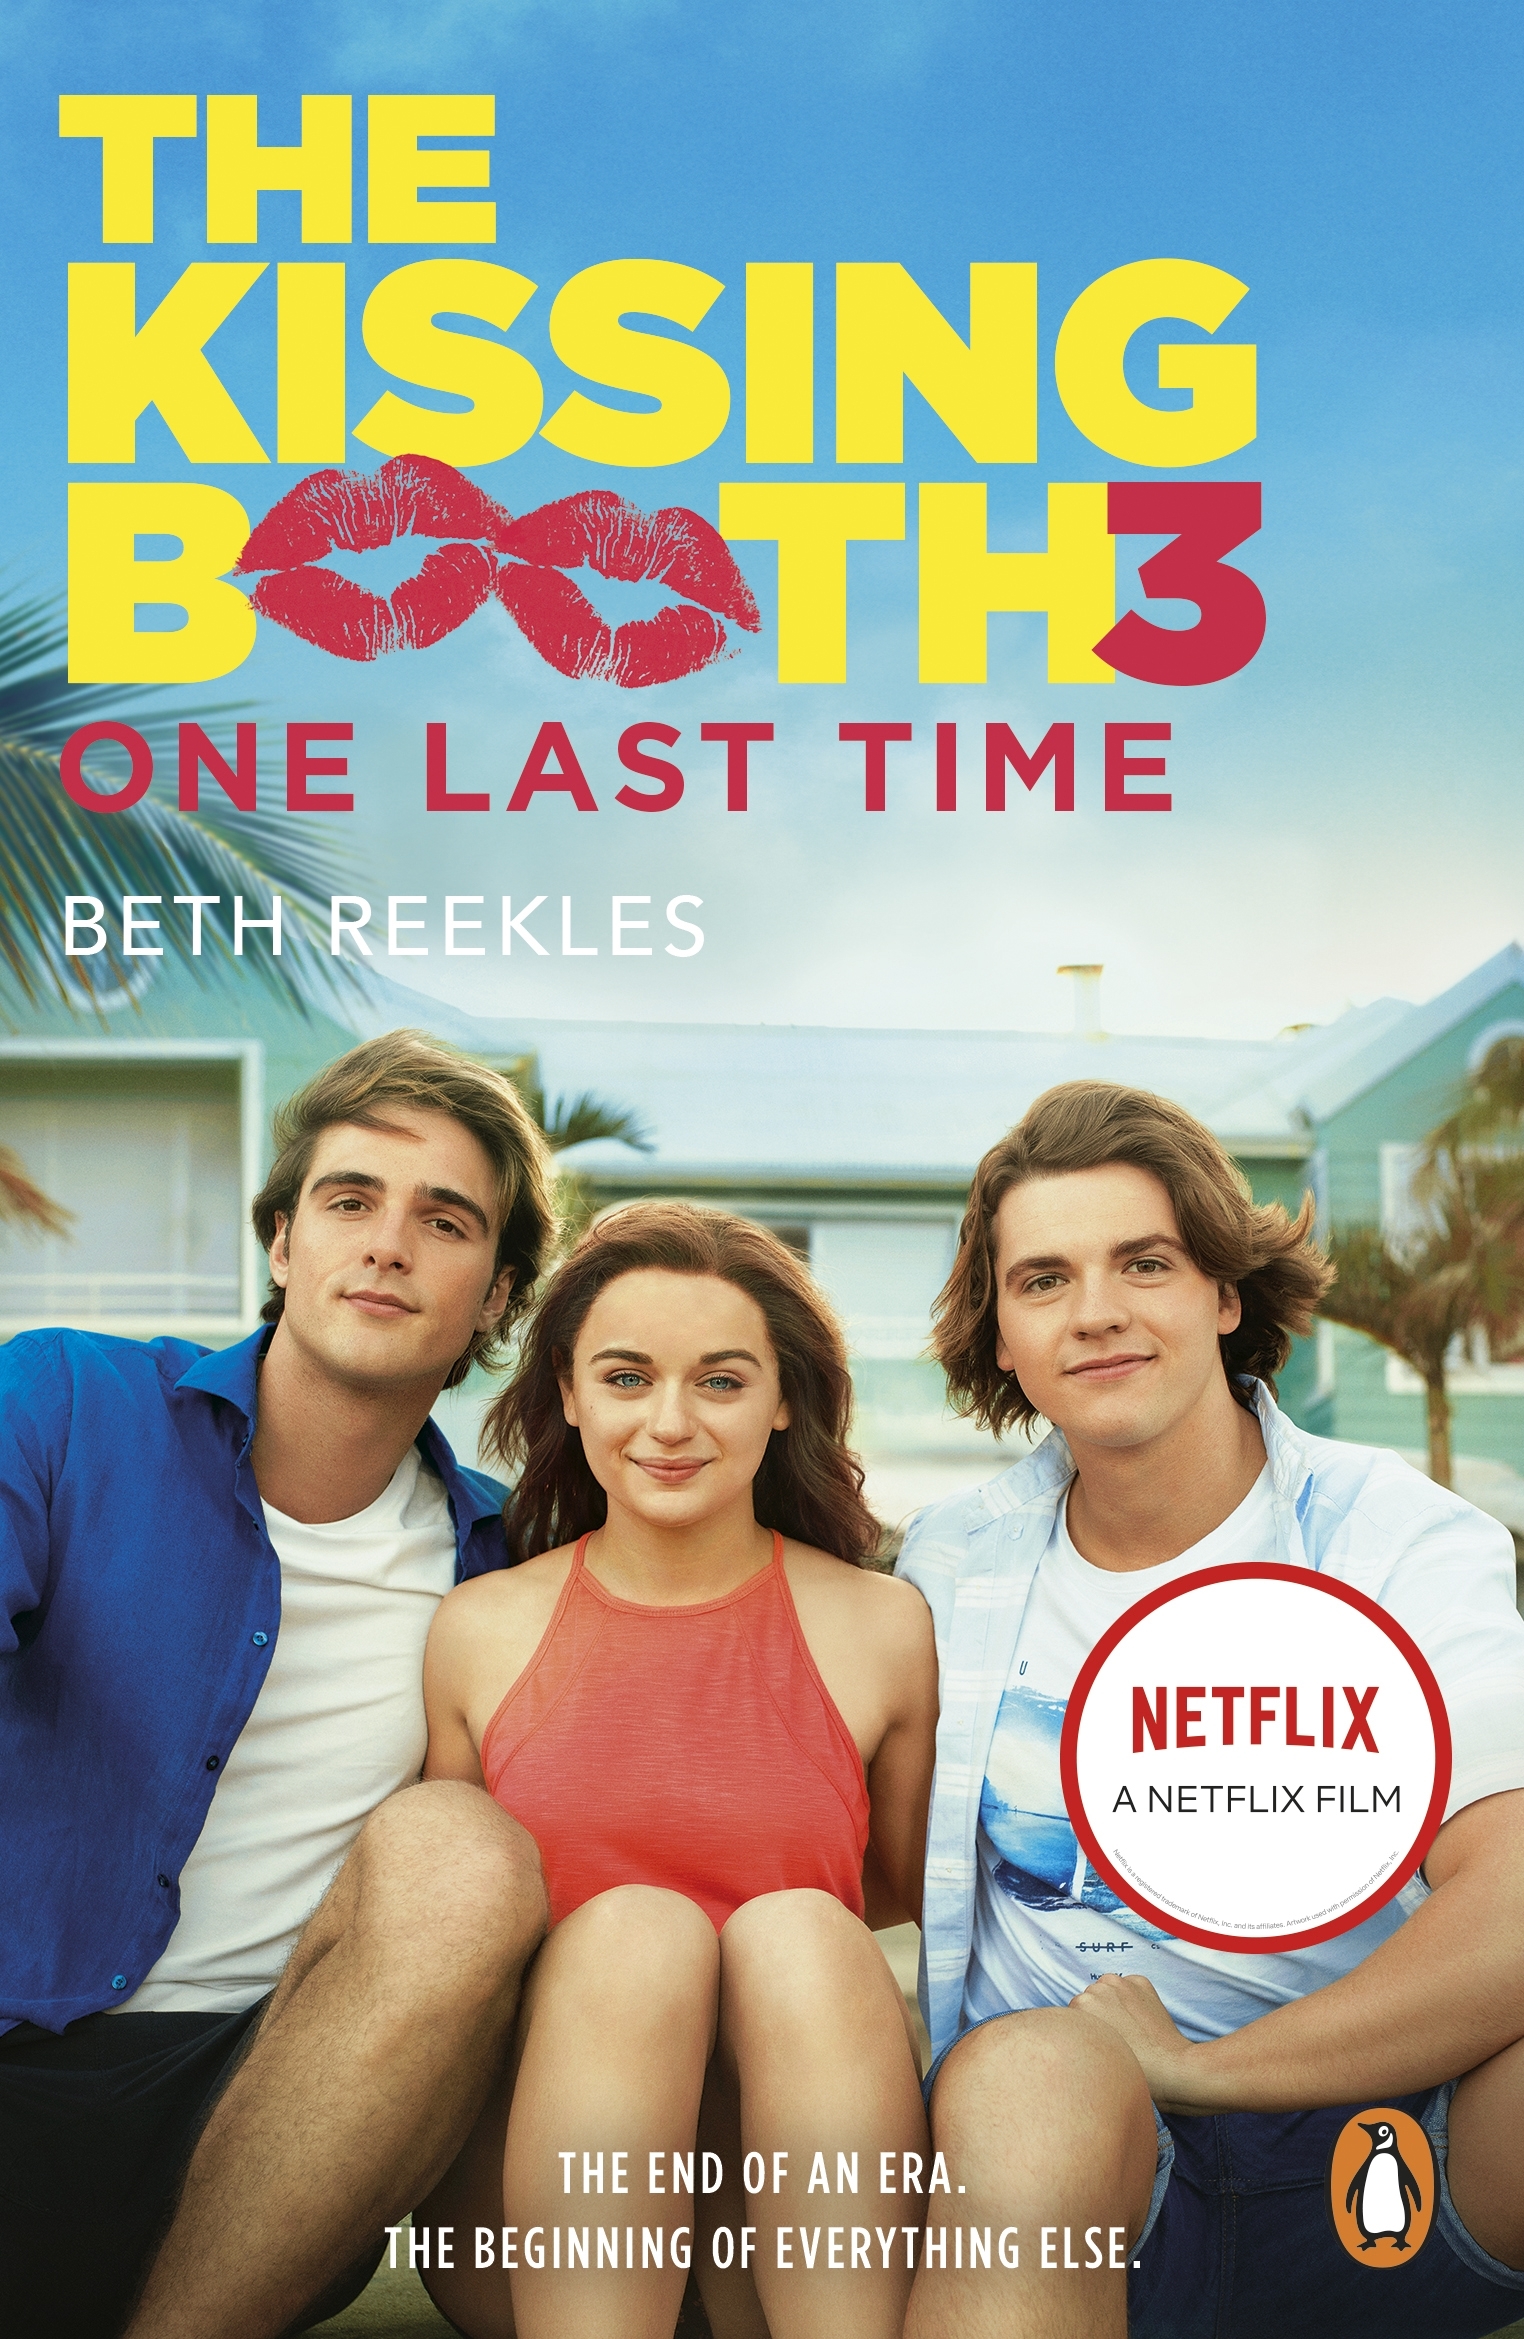 The Kissing Booth 3: One Last Time by Beth Reekles - Penguin Books New  Zealand